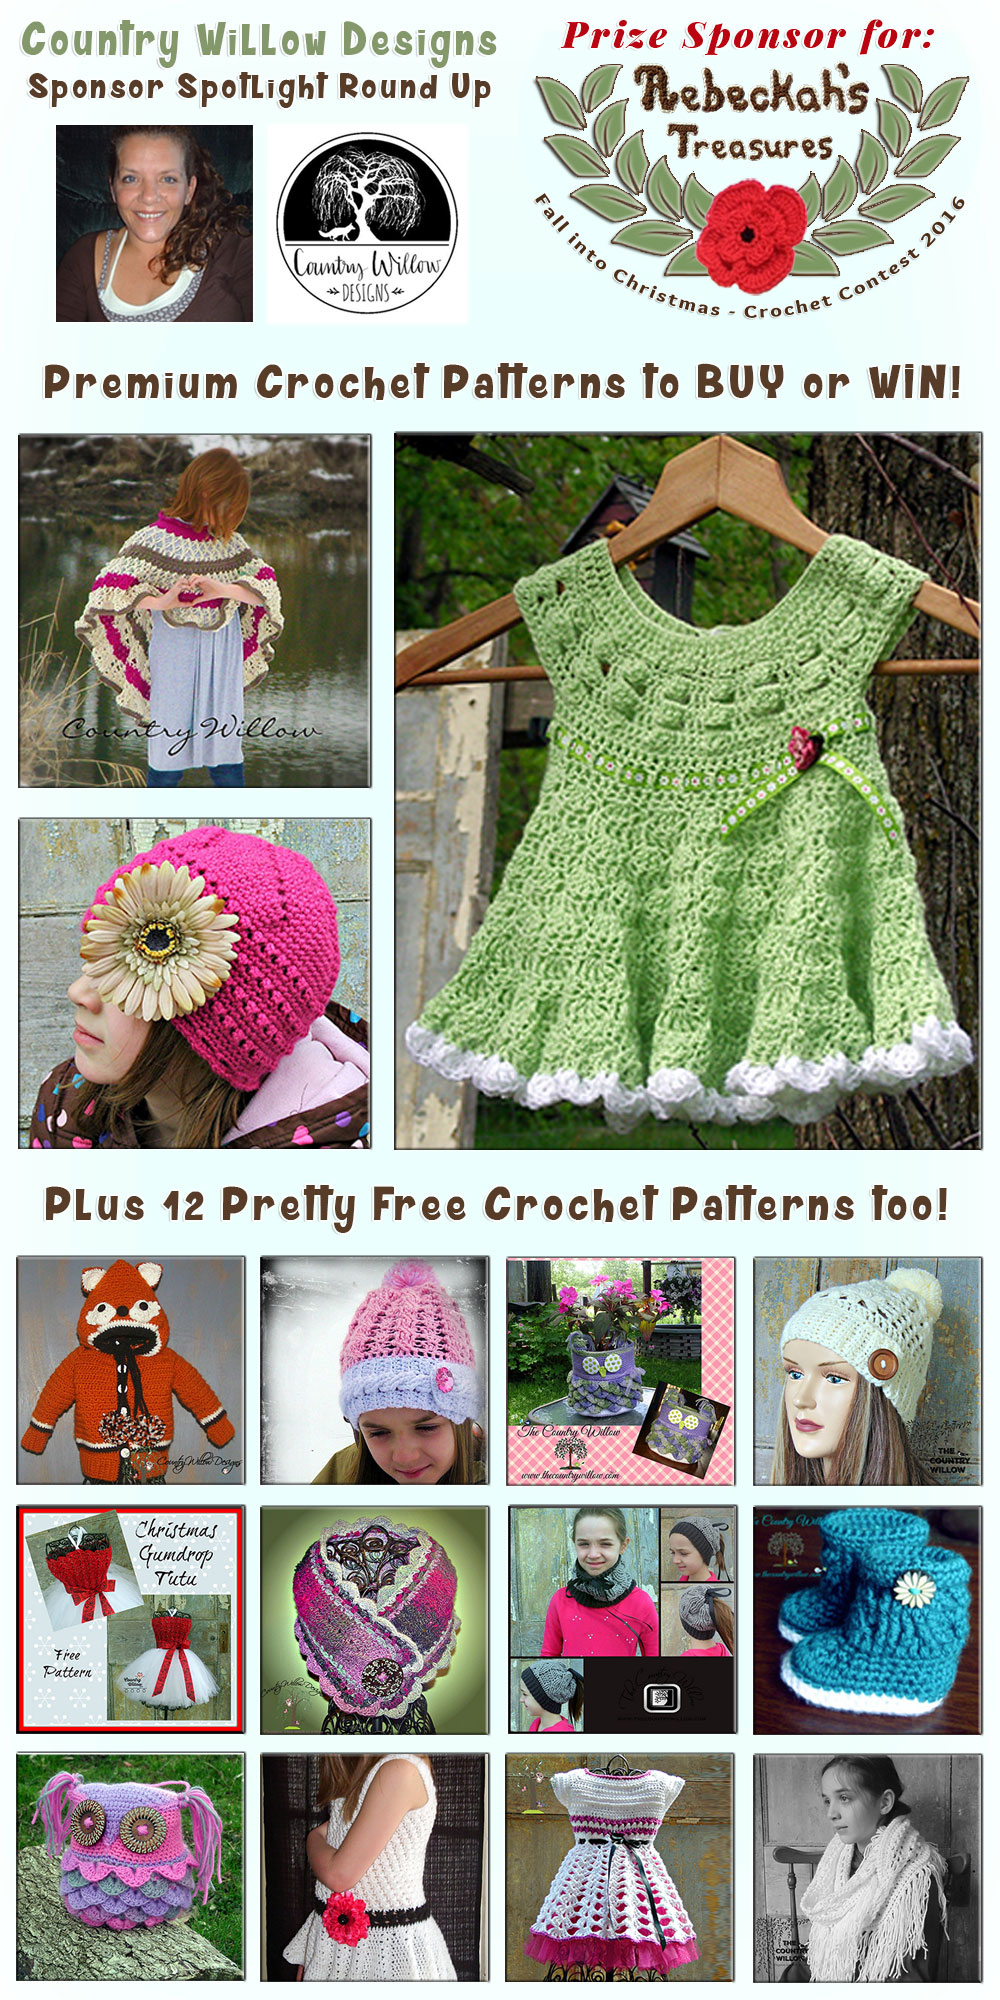 Country Willow Designs - Sponsor Spotlight Round Up via @beckastreasures | 3 Premium + 12 #FREE Crochet Patterns by @countrywillow12 | #fallintochristmas2016 #crochetcontest #spotlight #crochet #roundup